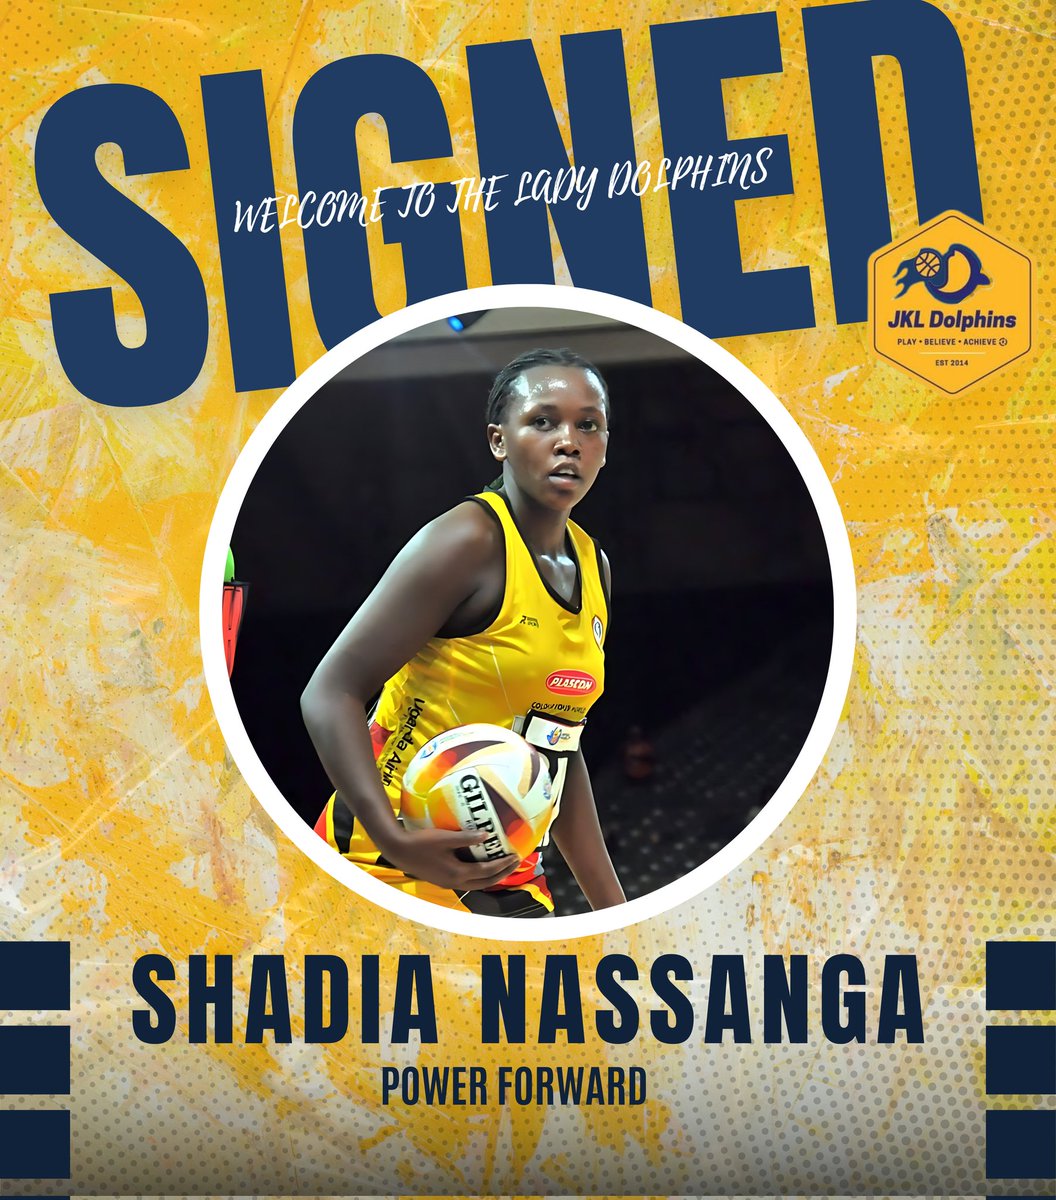 Newest #LadyDolphins alert⚠🐬 Please welcome Shadia Nassanga from KCCA netball & @shecranes256